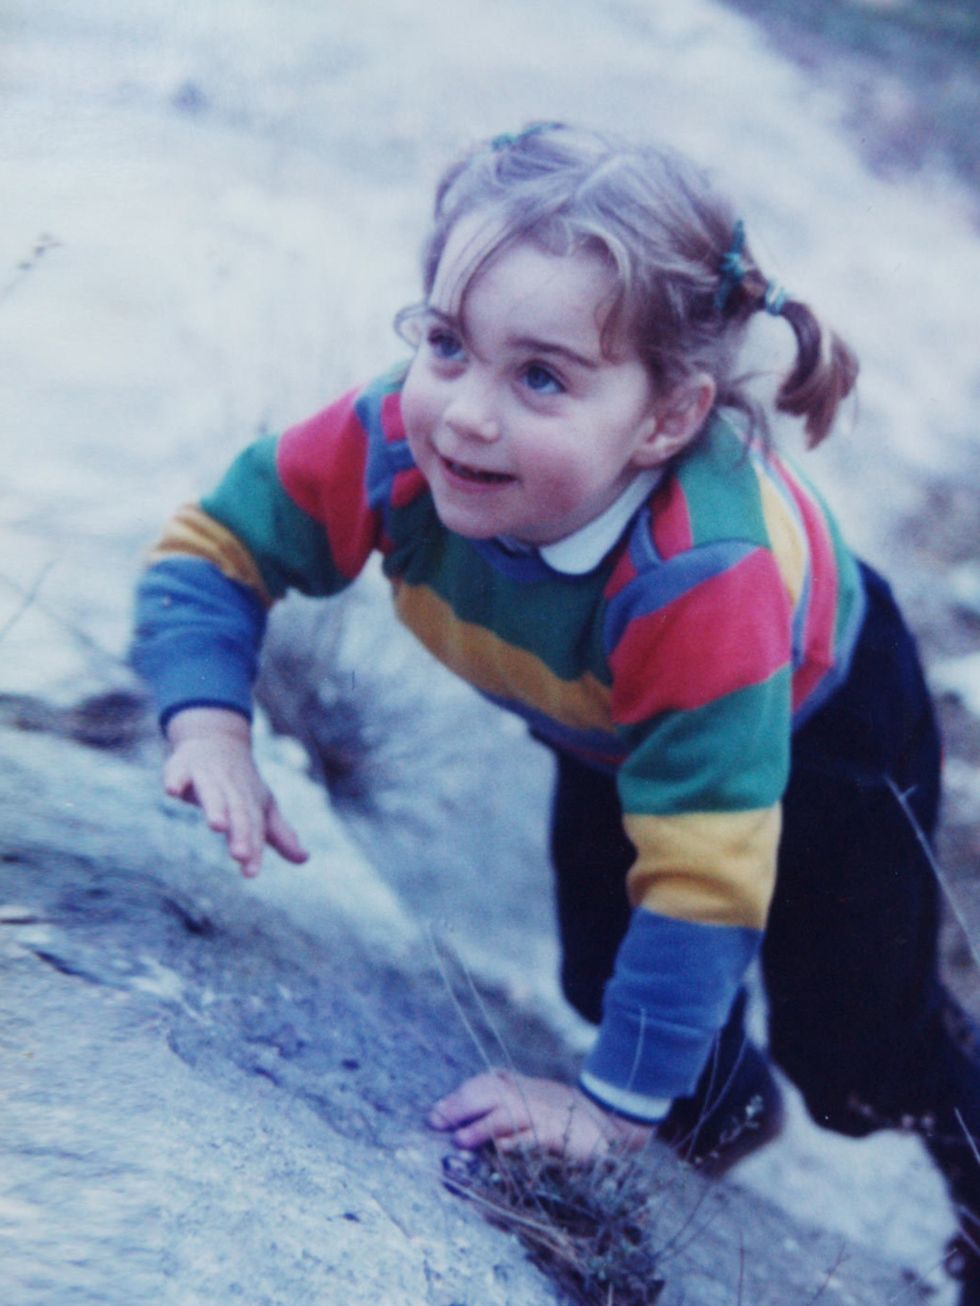 <p><a href="http://www.elleuk.com/star-style/celebrity-style-files/kate-middleton-s-style-file">Kate Middleton</a>, aged three, on a family holiday in the Lake District.</p>